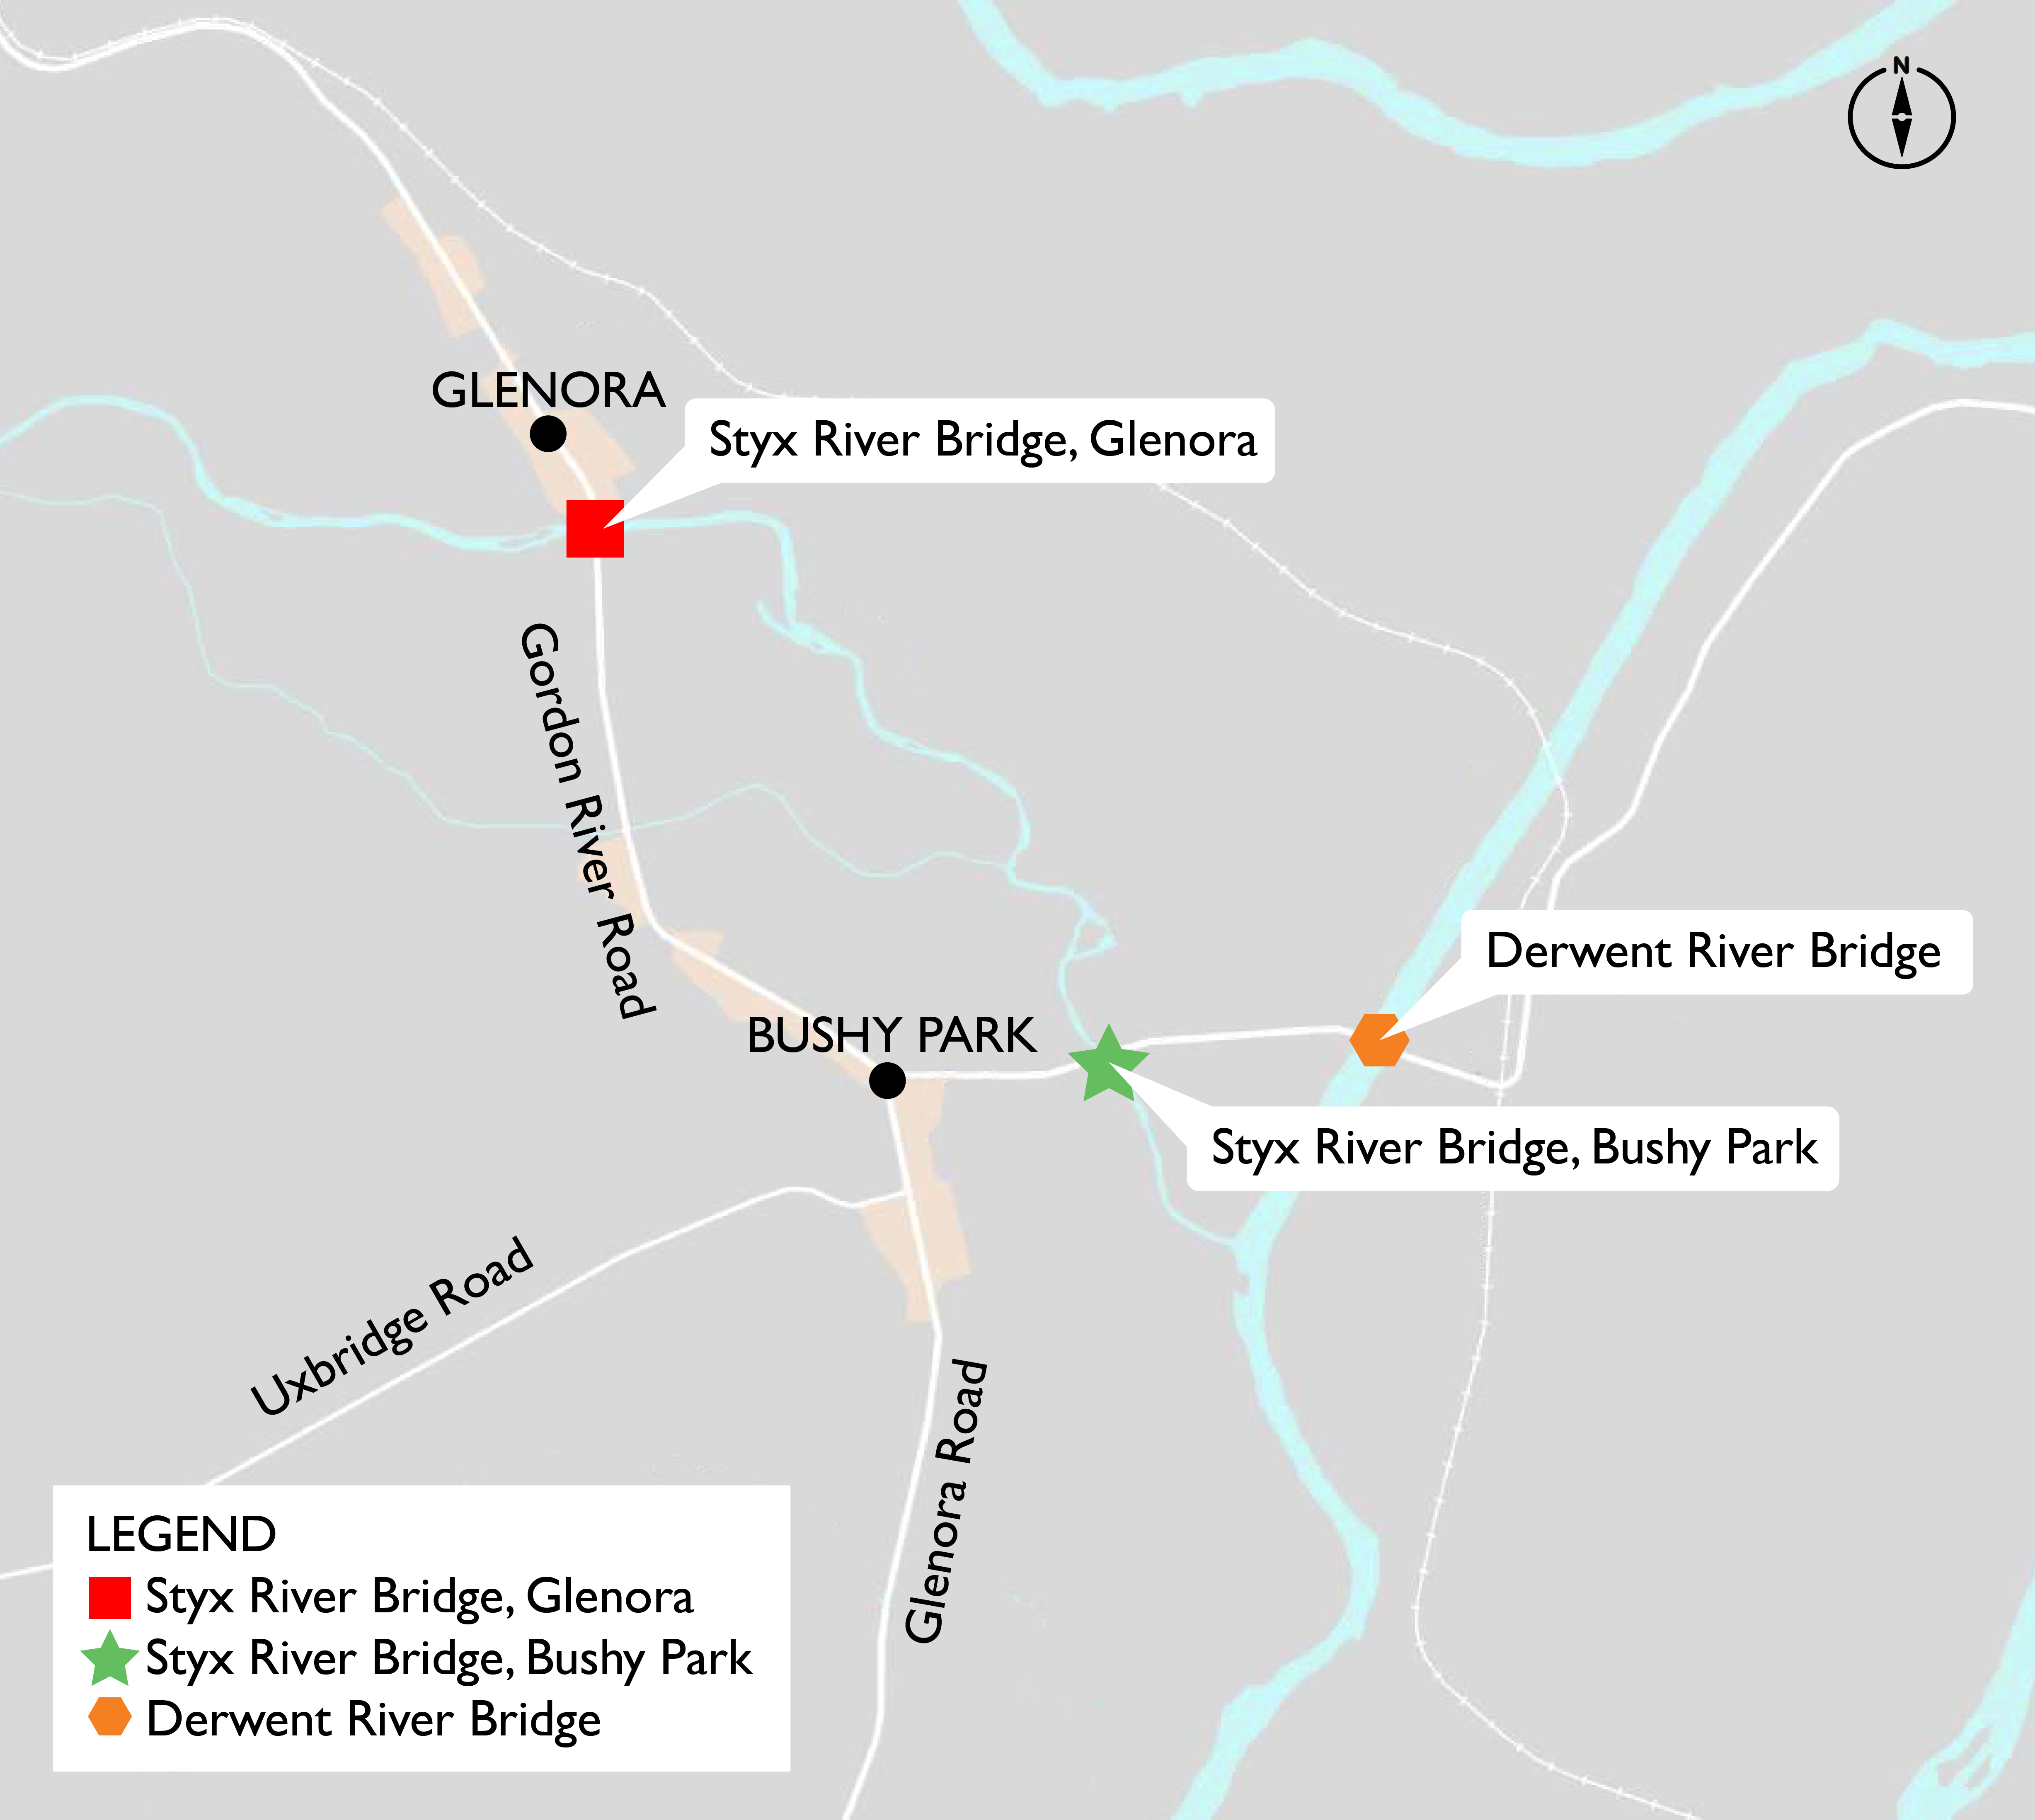 A map of the Styx River Bridge